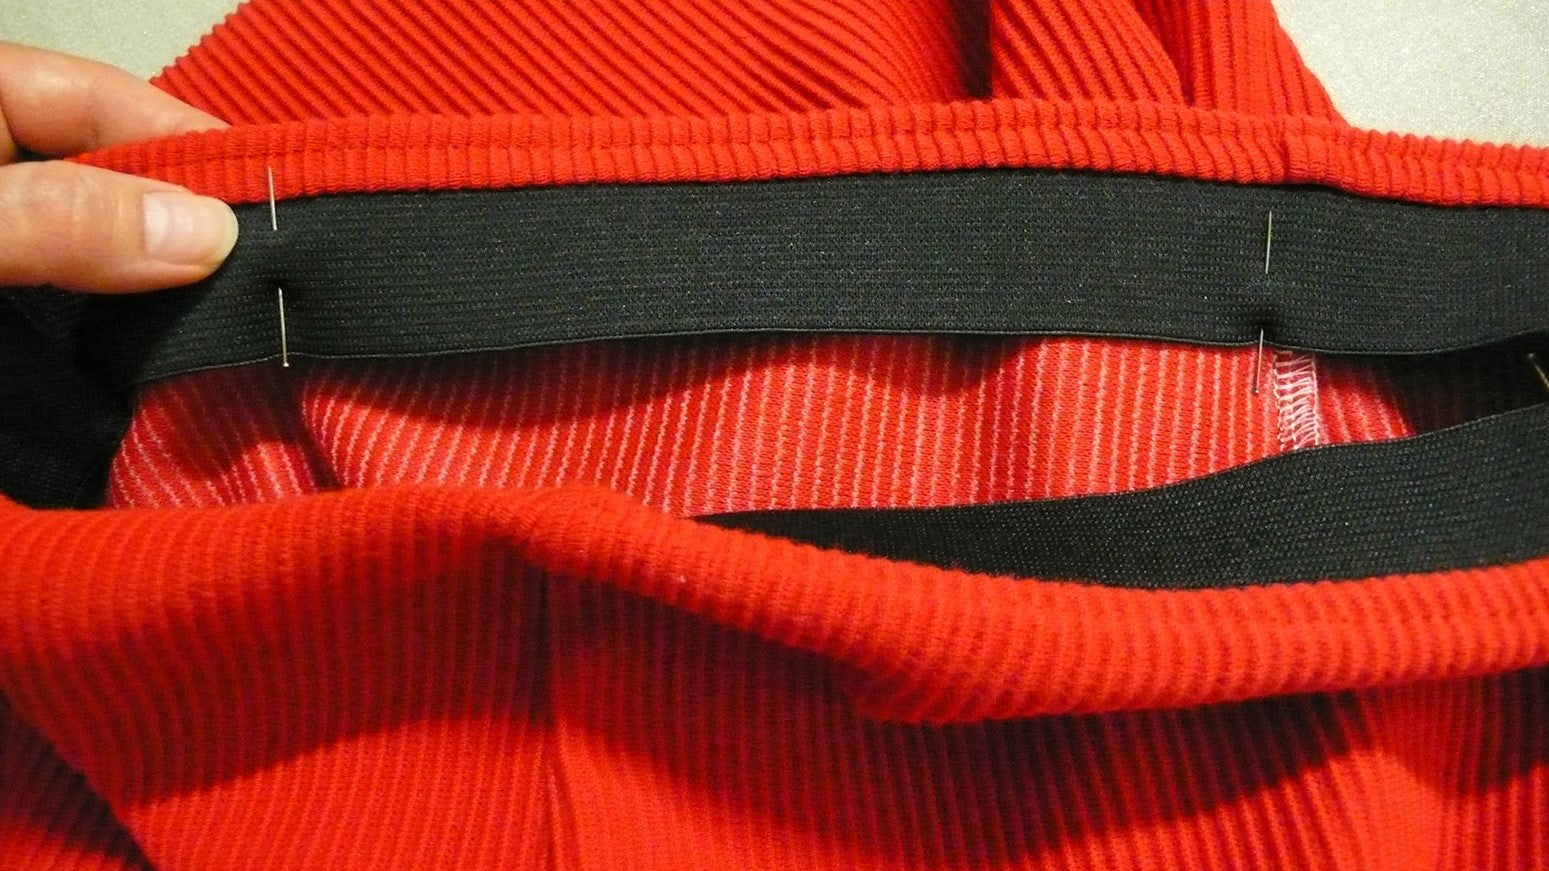 A photograph of the interior construction of the unlined skirt, specifically the waistband section. The elastic band is black, and the fabric is ribbed and red-colored.